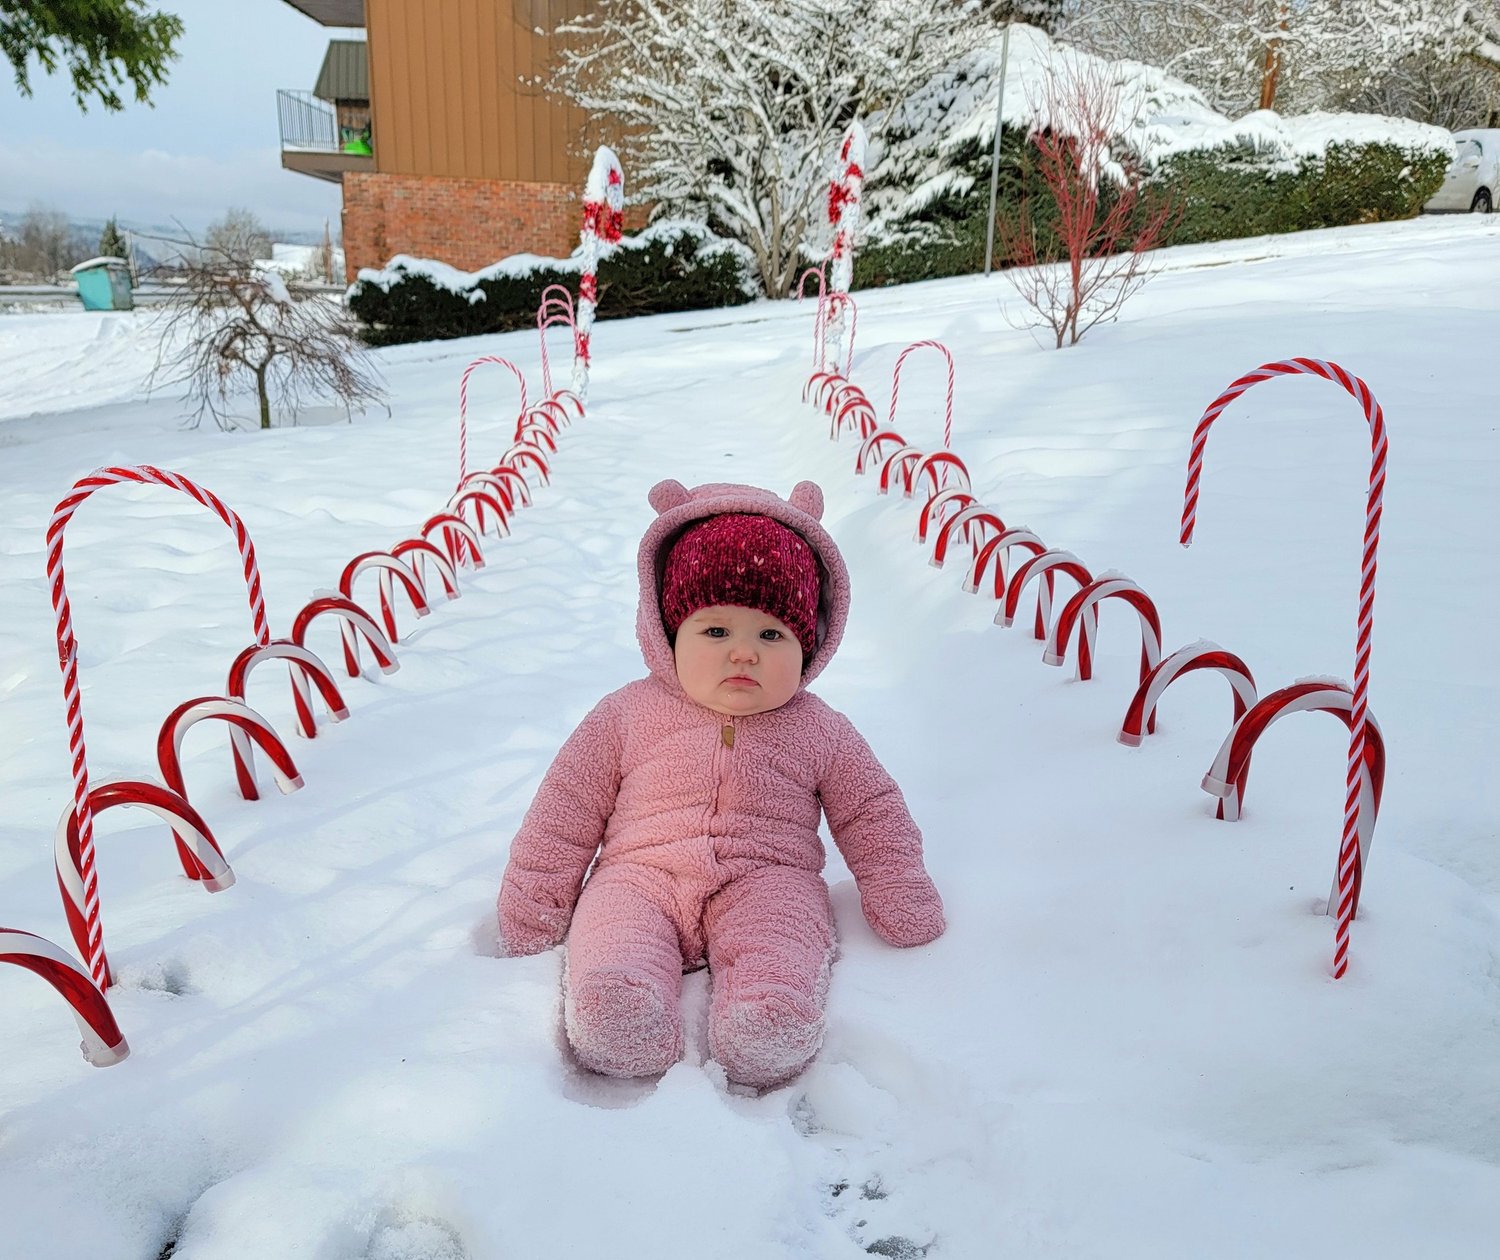 Natalya, 8 months old, experienced her first snow in Chehalis this week. This photo was submitted by her mother.